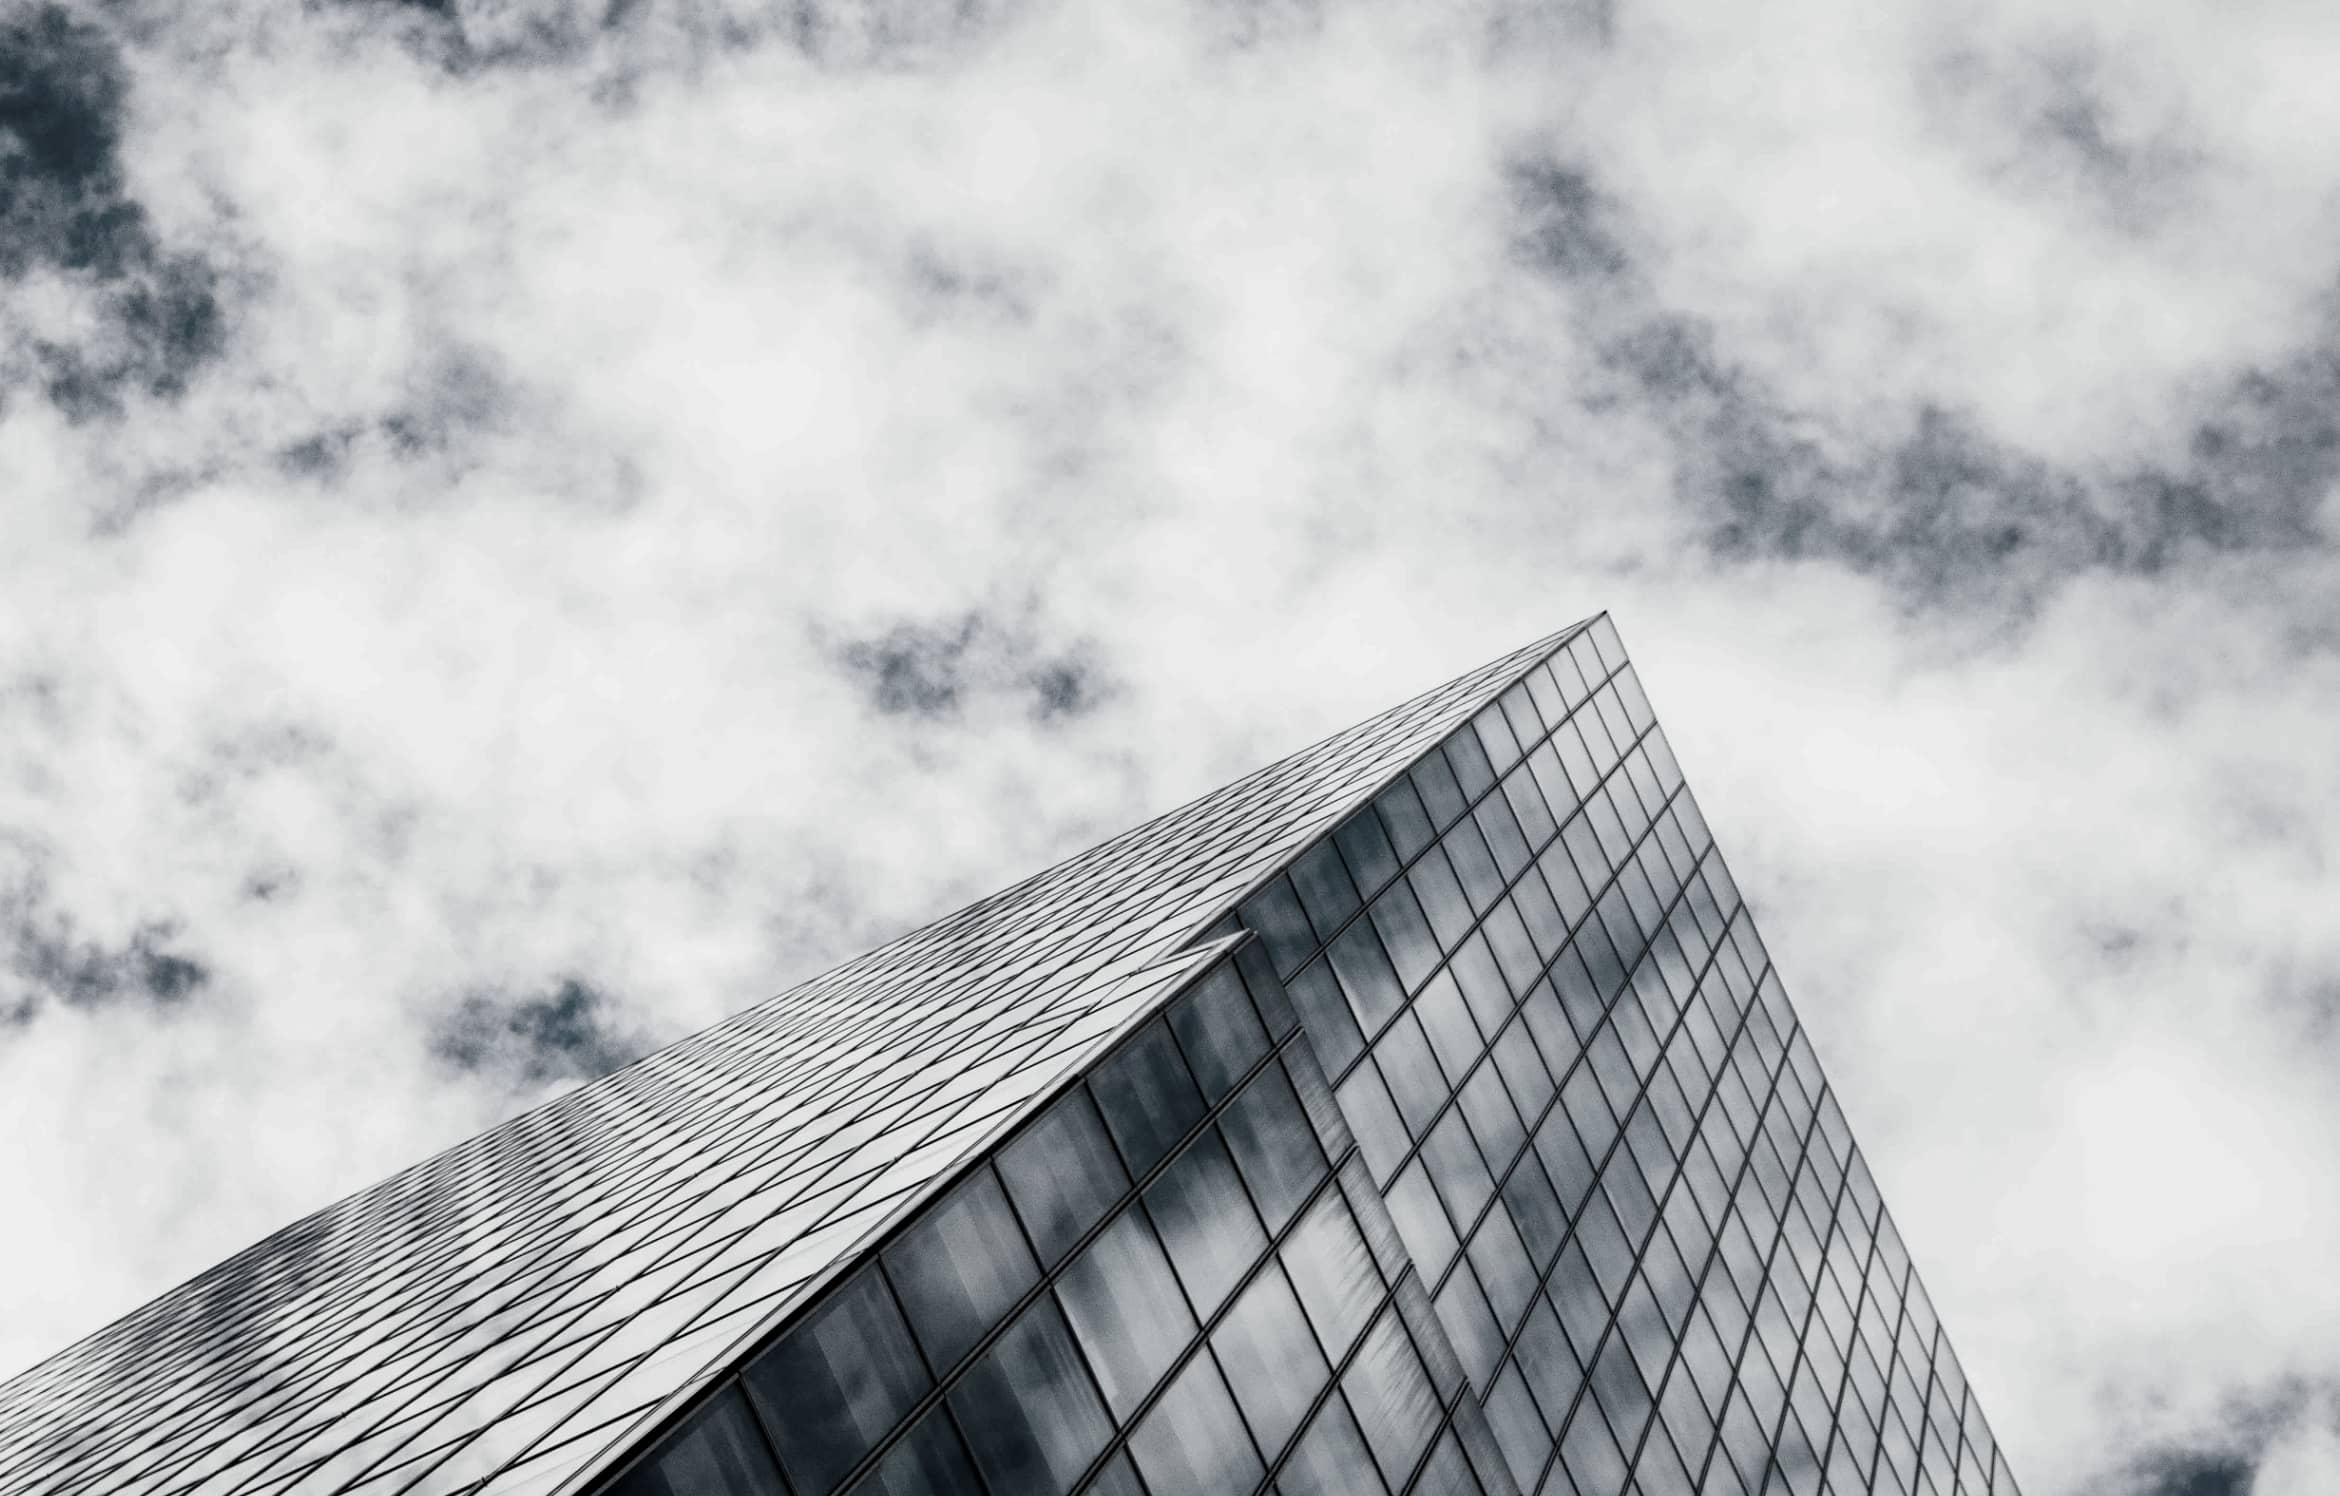 An upwards view of a glass covered office building and a cloudy sky